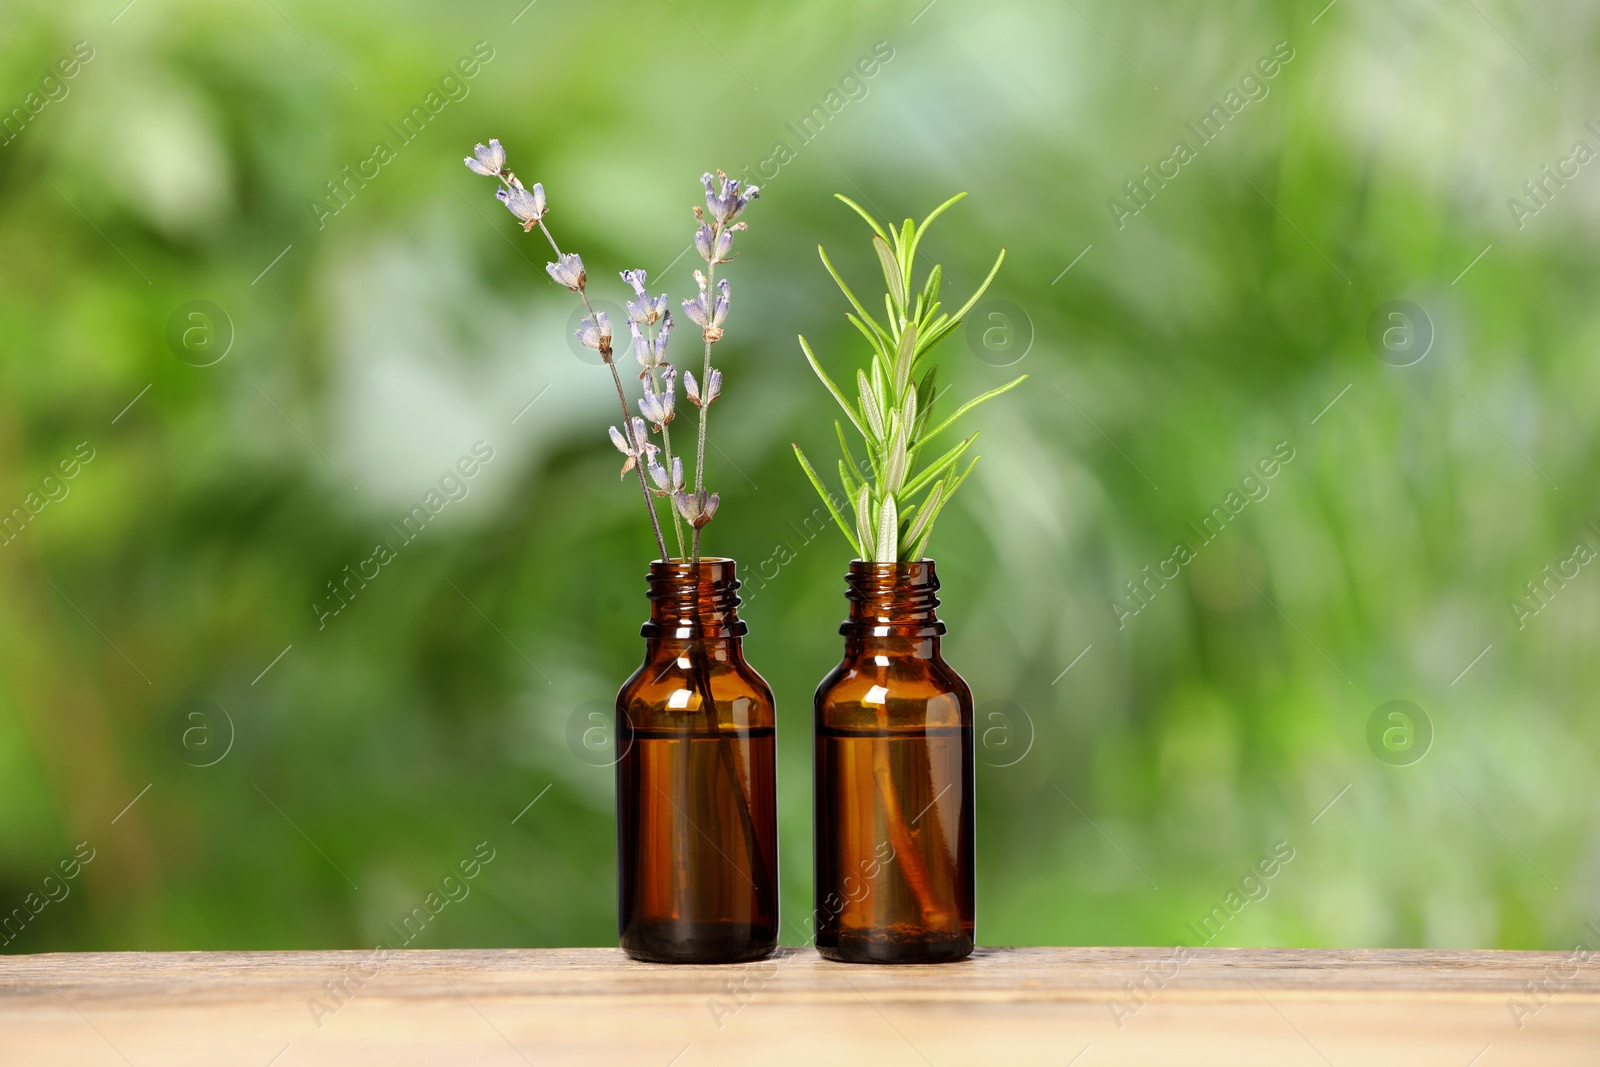 Photo of Bottles with essential oils, lavender and rosemary on wooden table against blurred green background